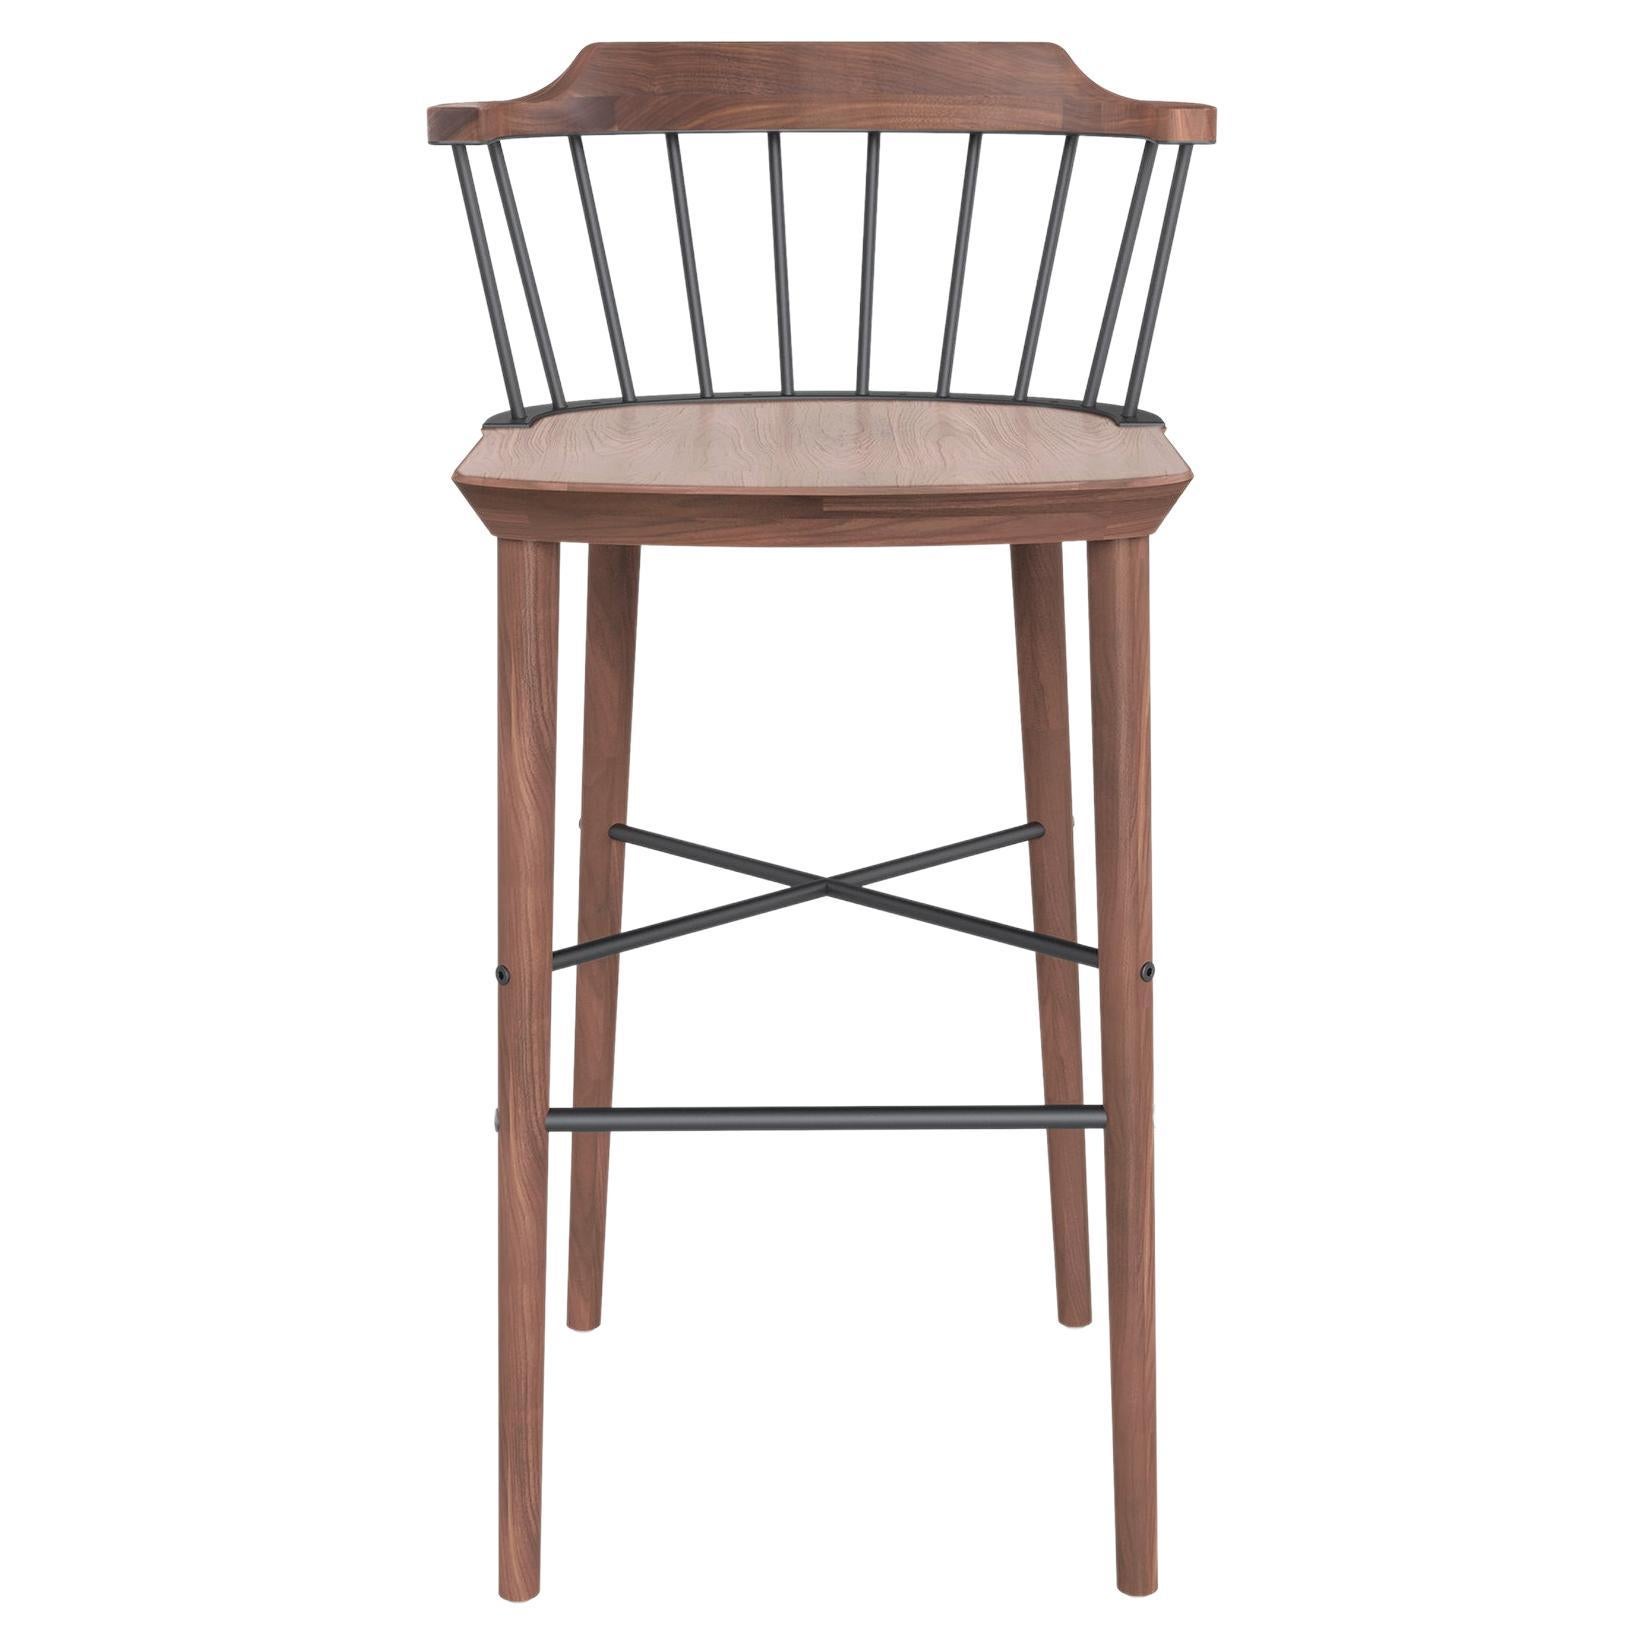 Walnut and Steel Bar Chair, Exhange SH750 For Sale